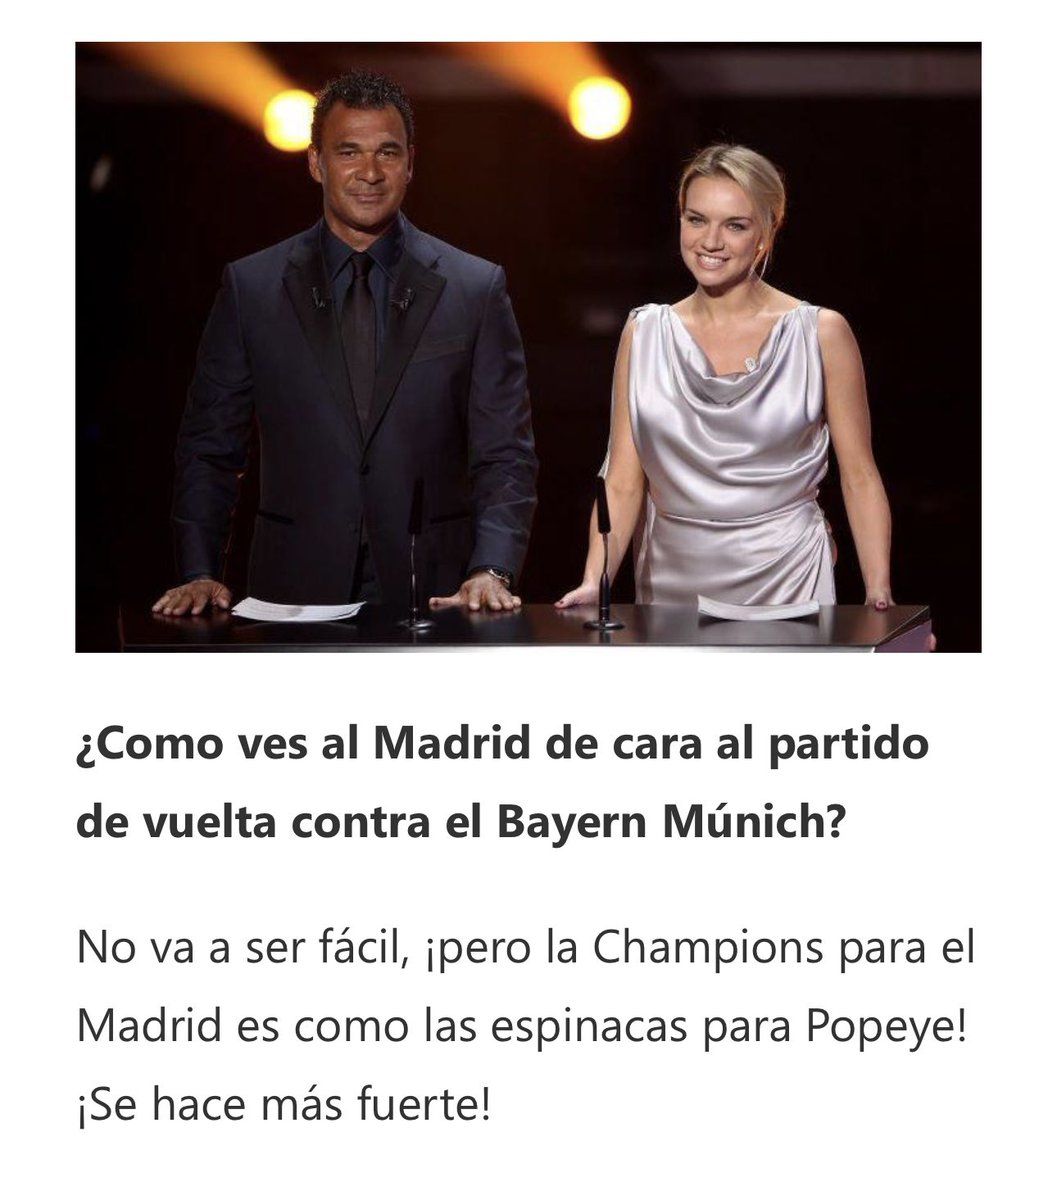 An interview with @RMadridistaReal in 2018 from 6 years ago 🧐 The Champions League for Real Madrid is like spinach for Popeye - it makes them stronger!